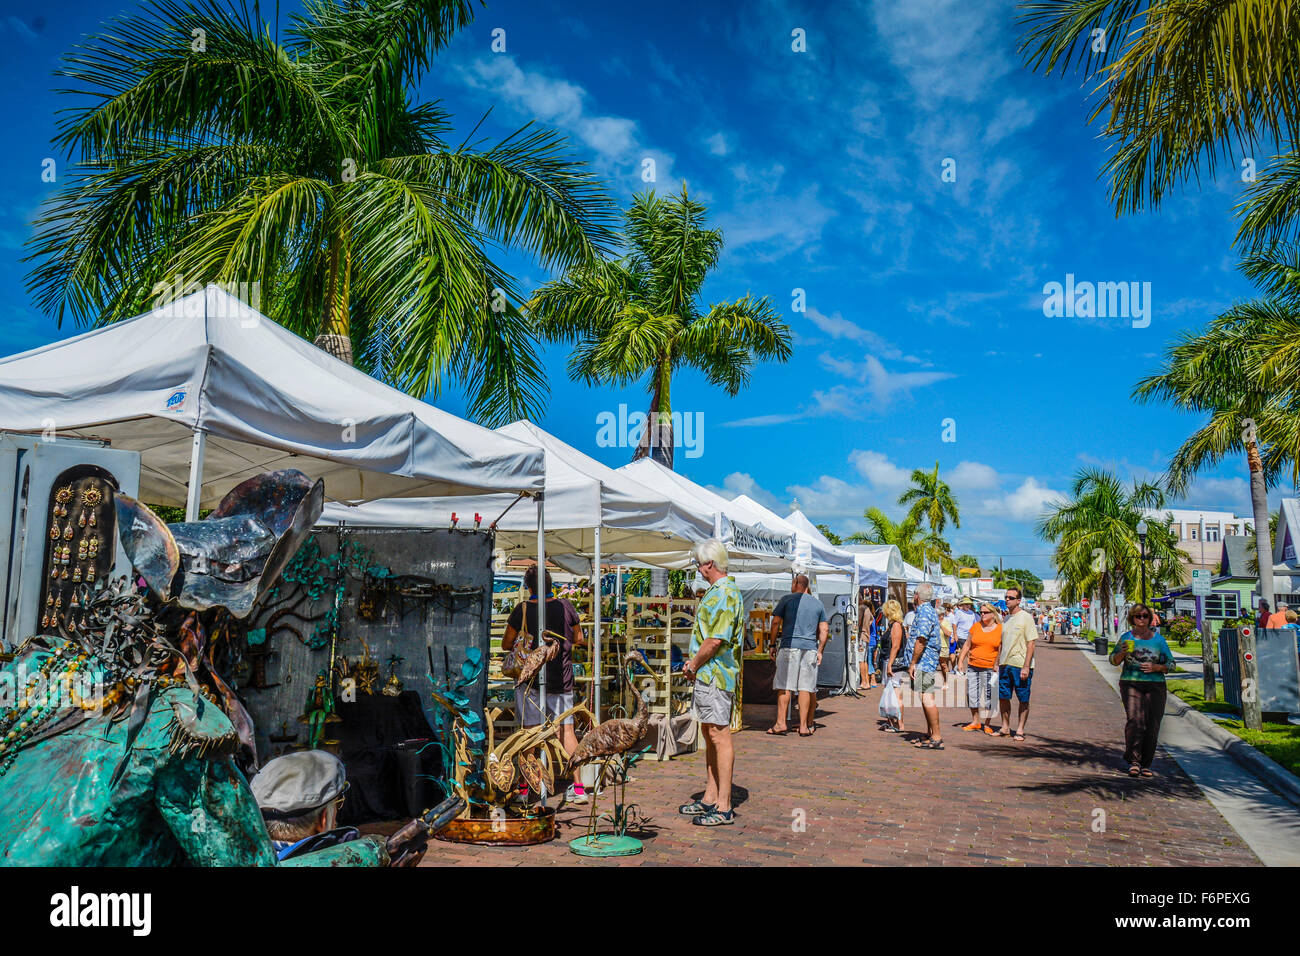 People strolling arts festival in sunny Florida, viewing artistic Sea life inspired art and decor, enjoying the lifestyle Stock Photo